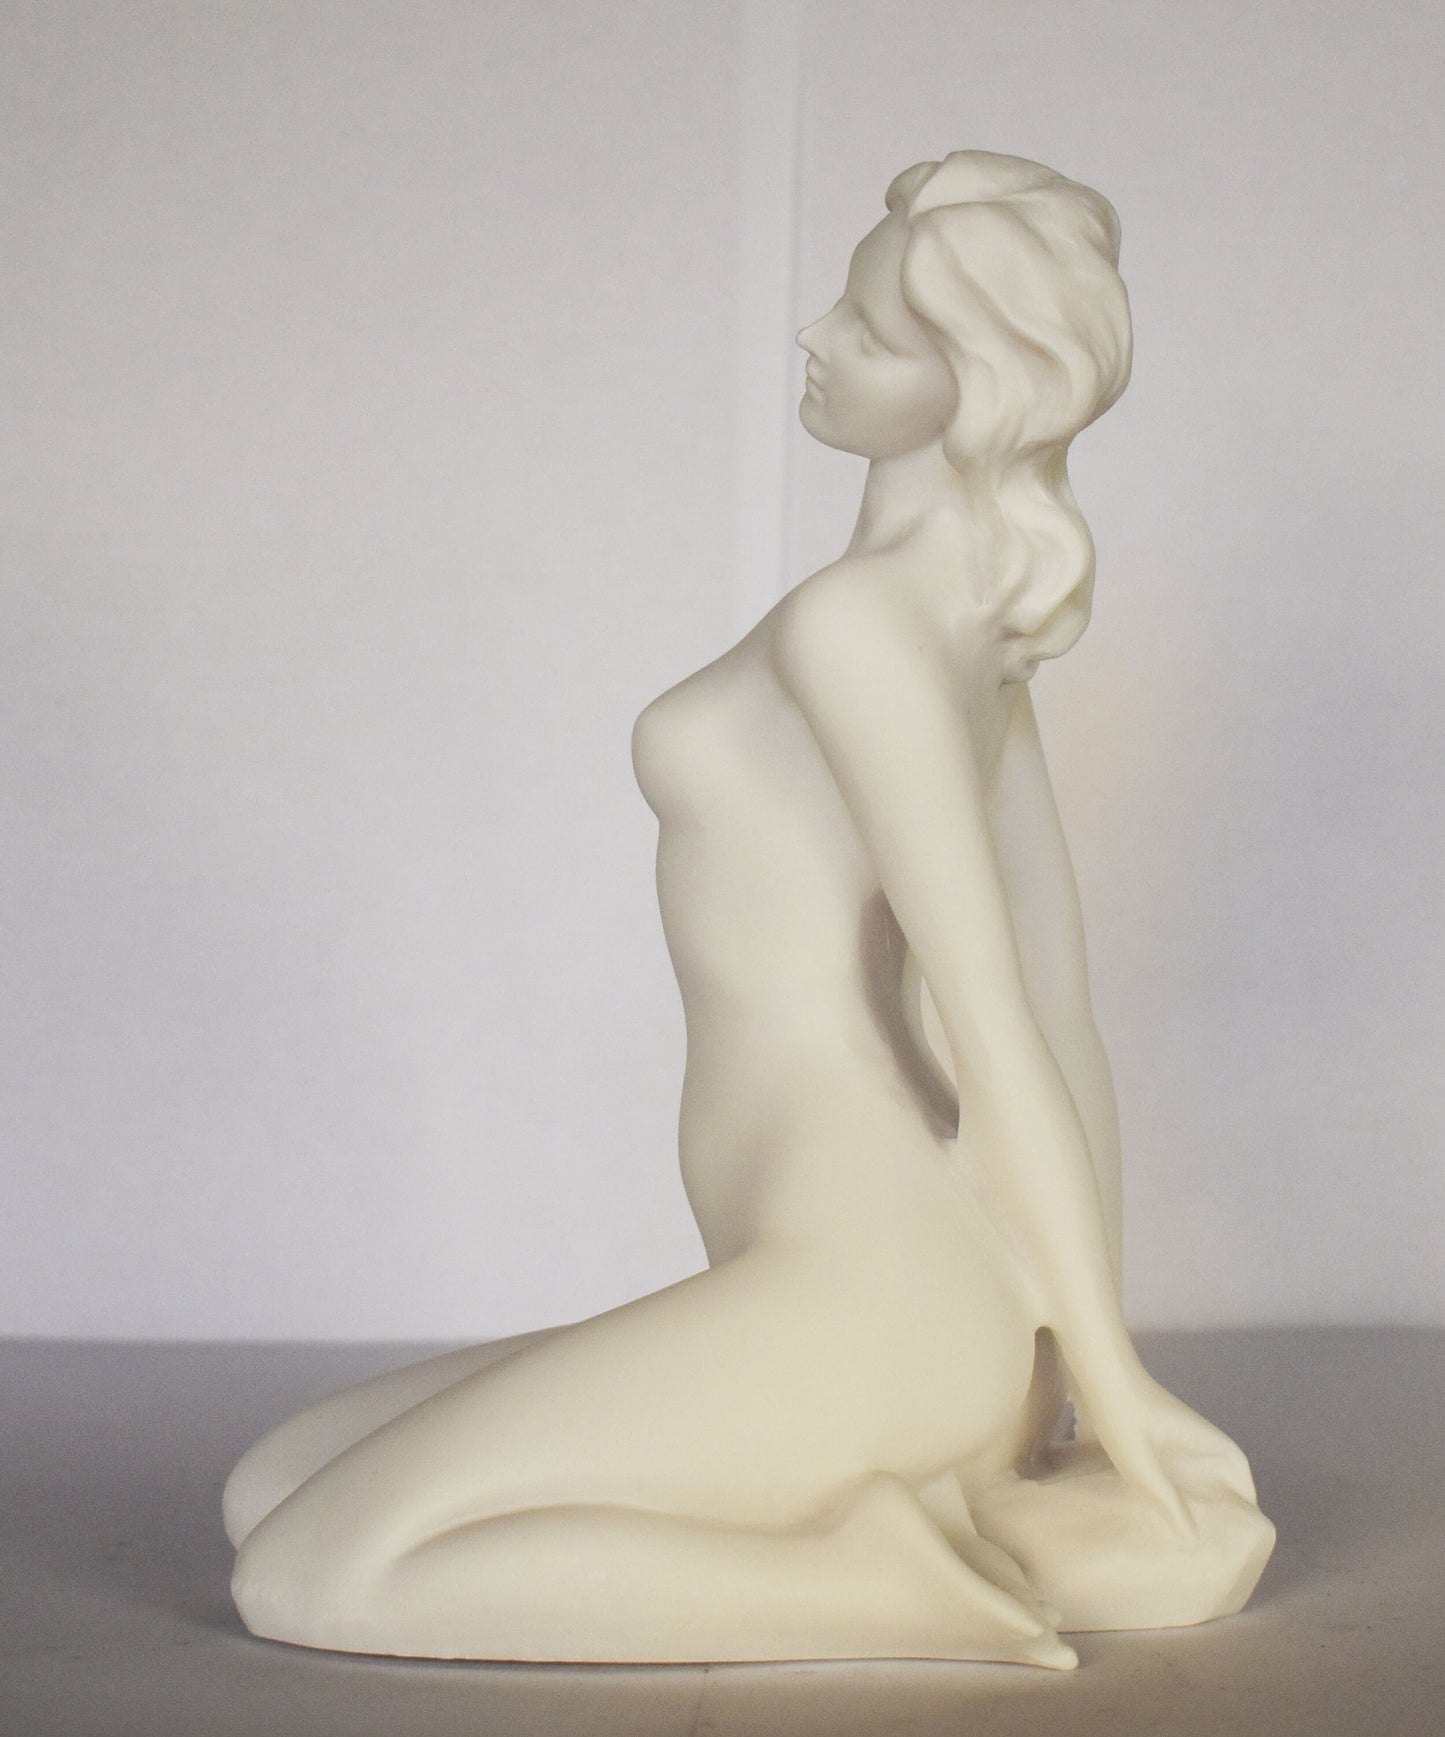 Naked Female Statue - Erotic Art - Sexy Pose - Beautiful Woman - Hot Body - Desire and Love - Alabaster Sculpture -